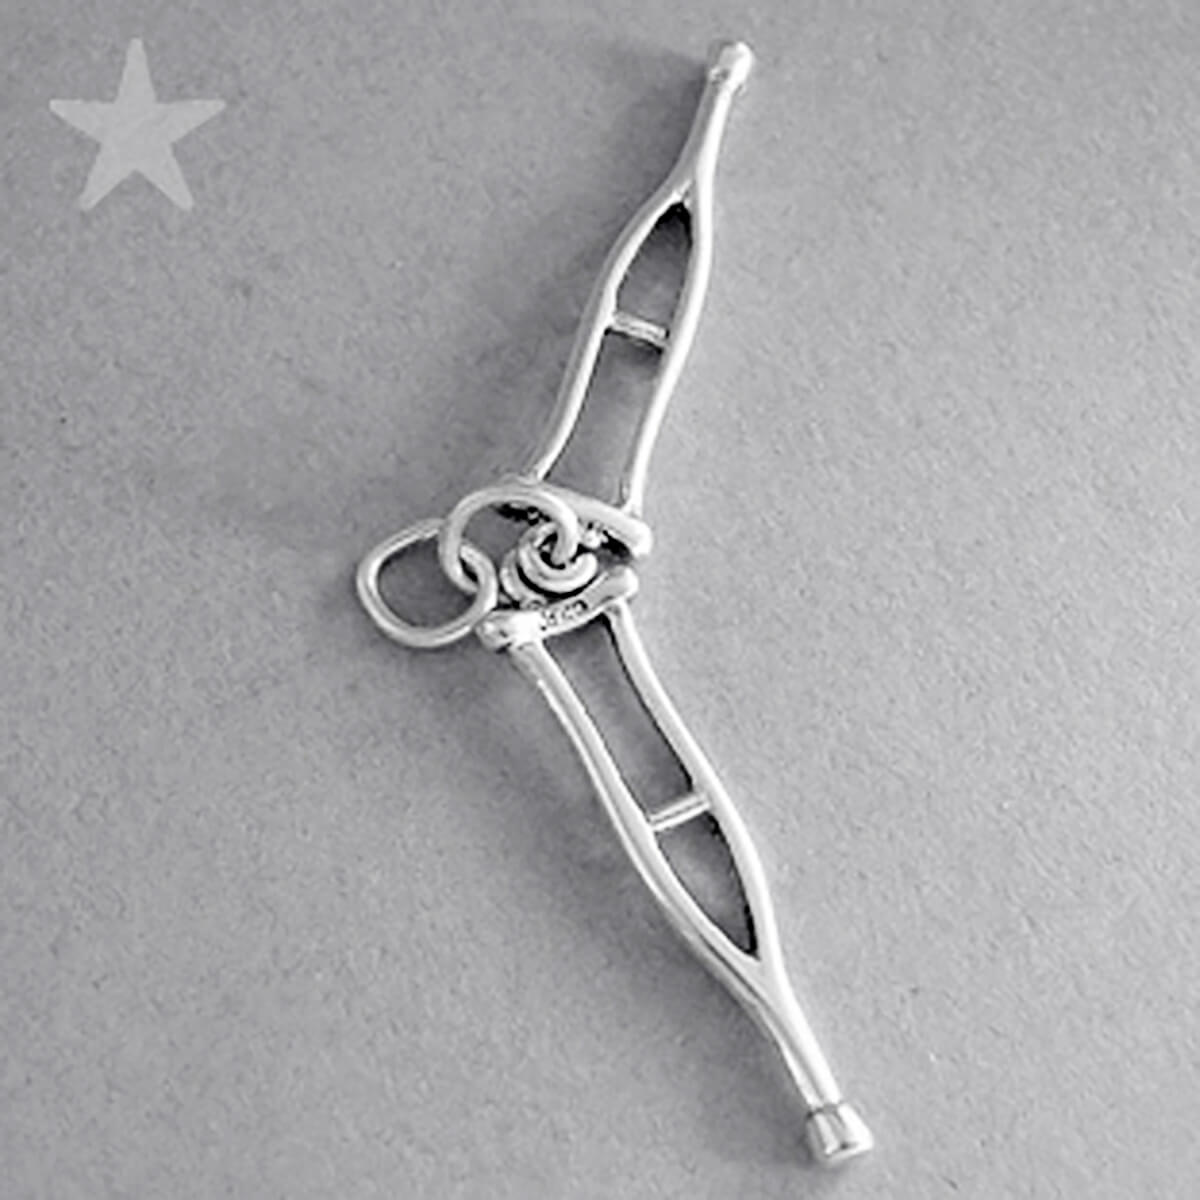 Crutches Charm Sterling Silver Hospital Pendant